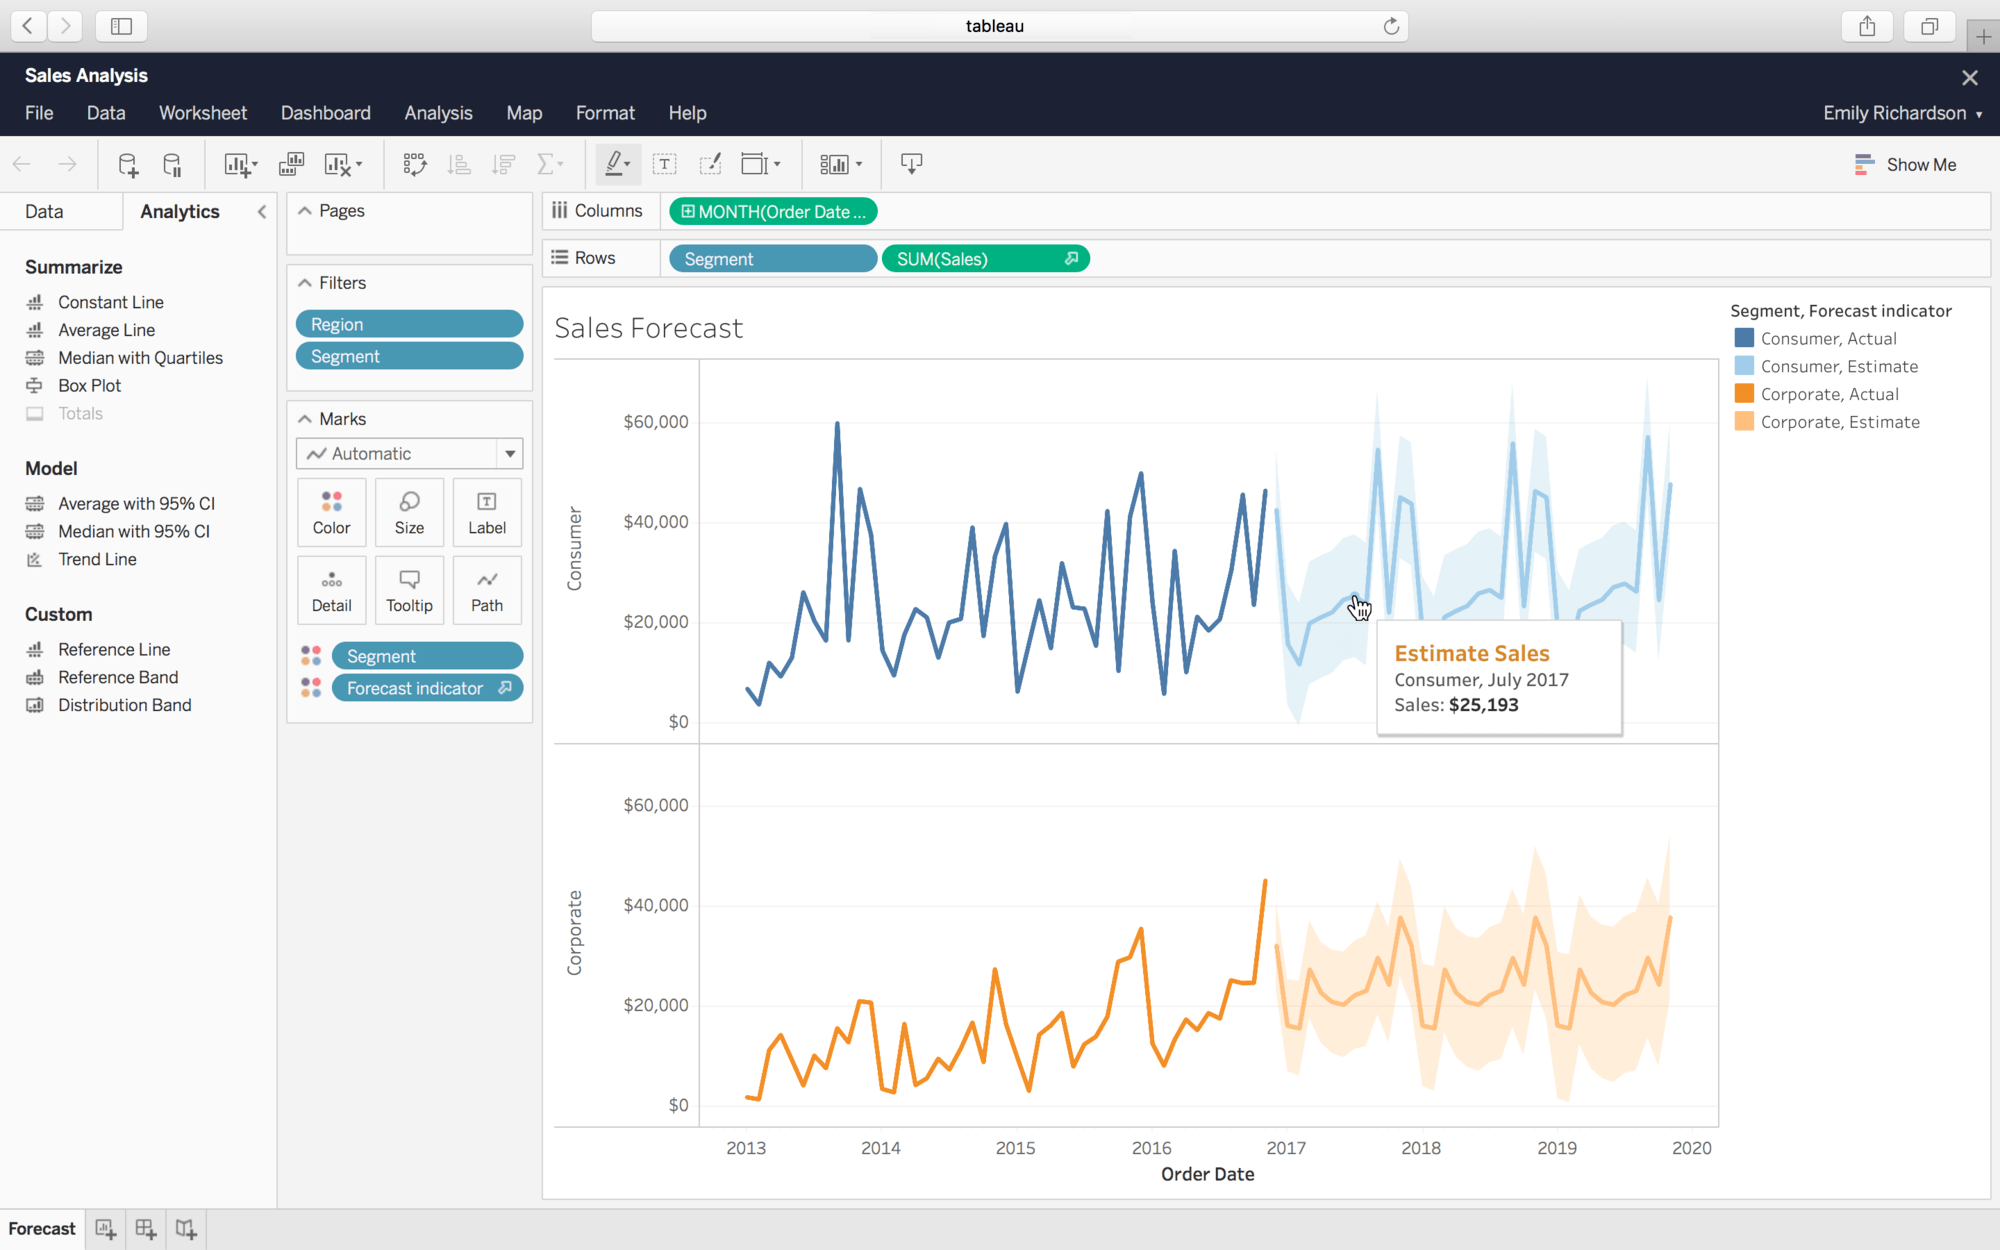 BI tool, with shining reporting and visualization capabilities Reporting software: Tableau